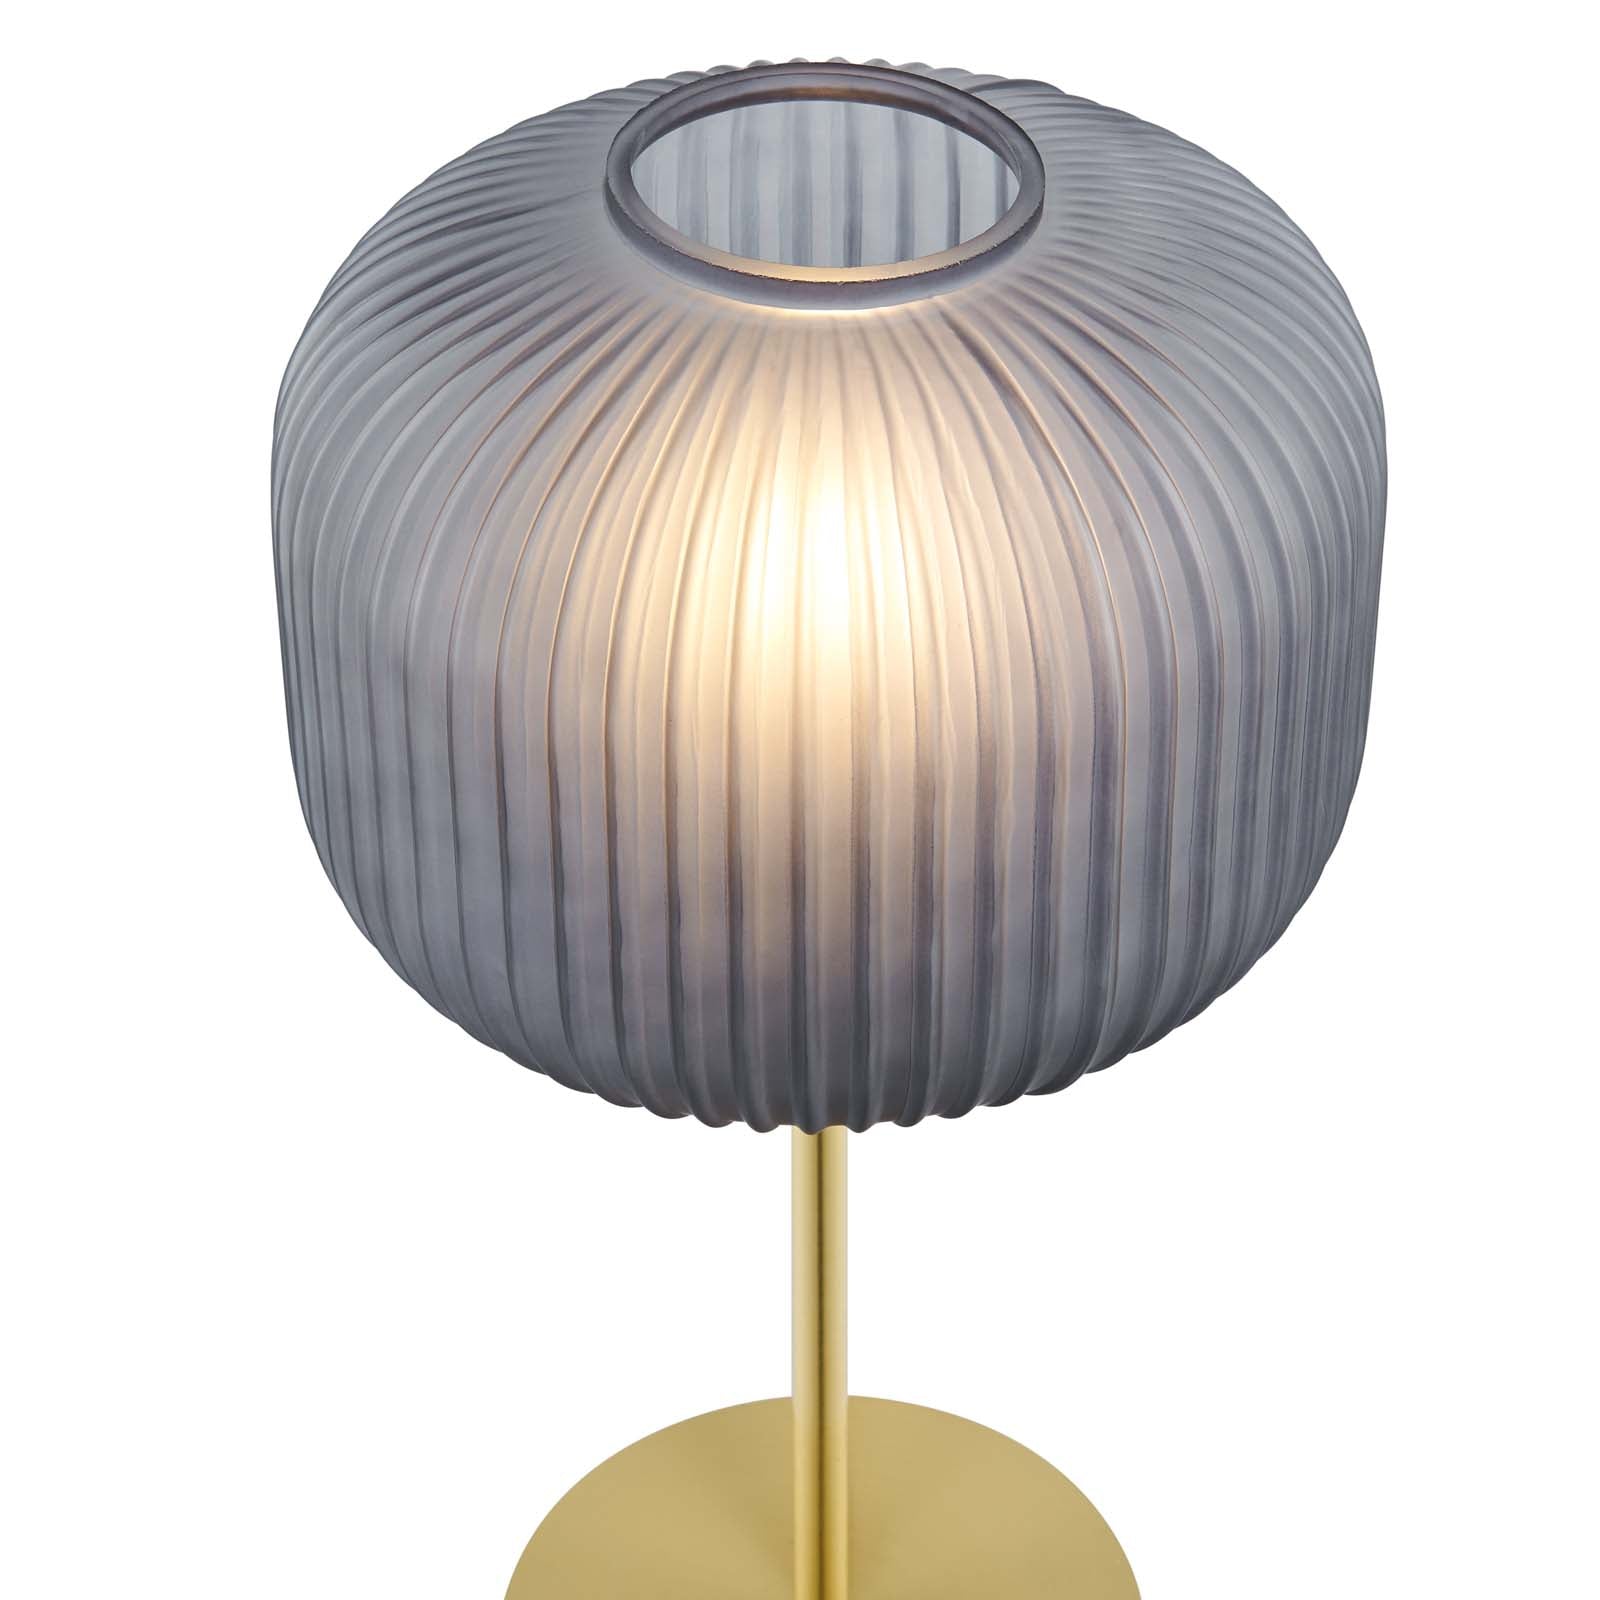 Reprise Glass Sphere Glass and Metal Table Lamp